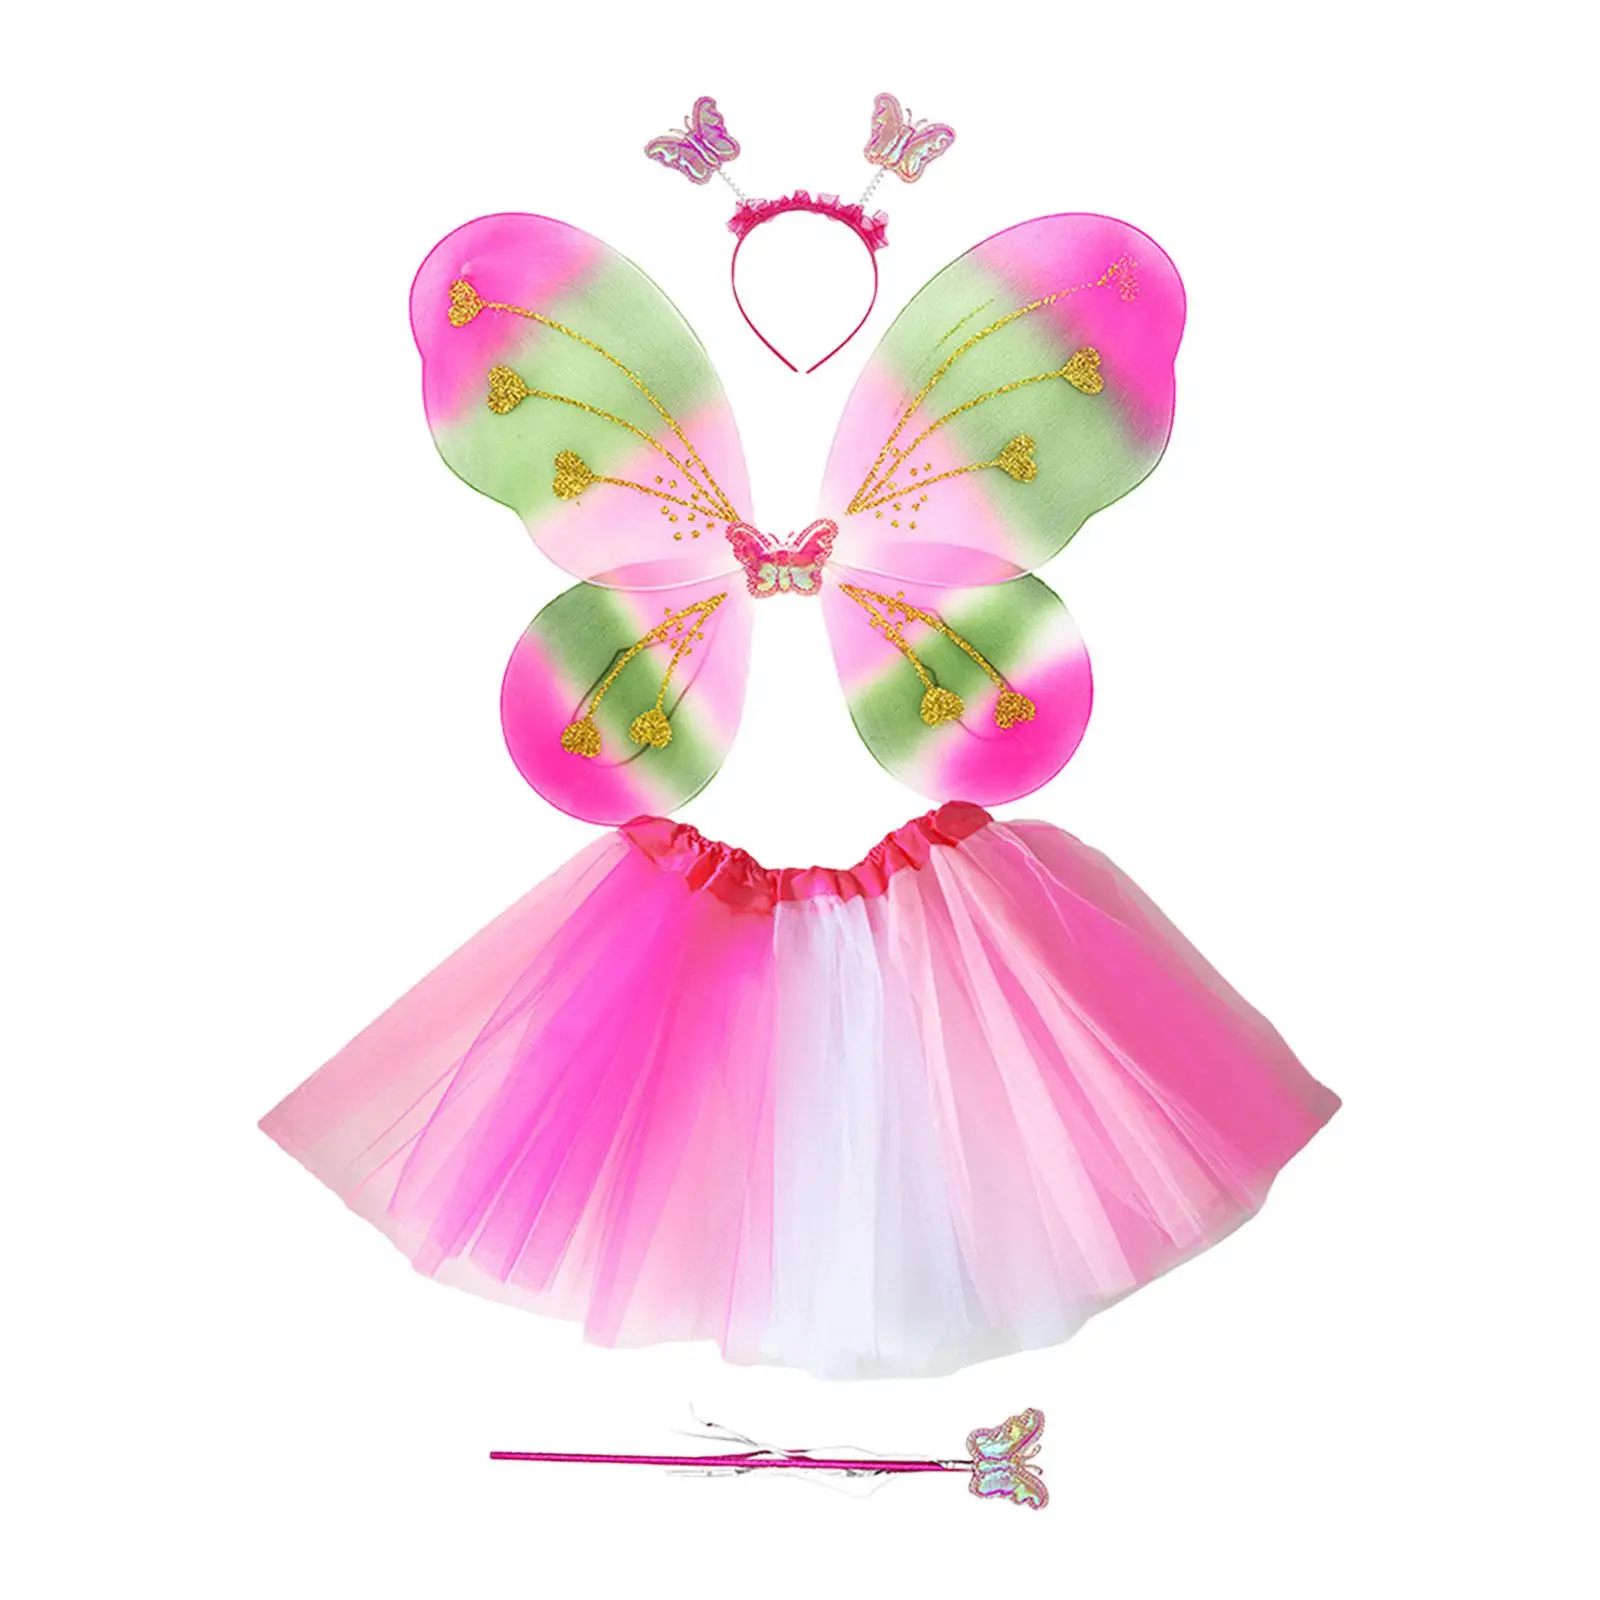 Fairy Wing for Girls Cosplay Clothes Children Girls Decorative Gifts Angel Wing for Carnival Party Festival Pretend Play